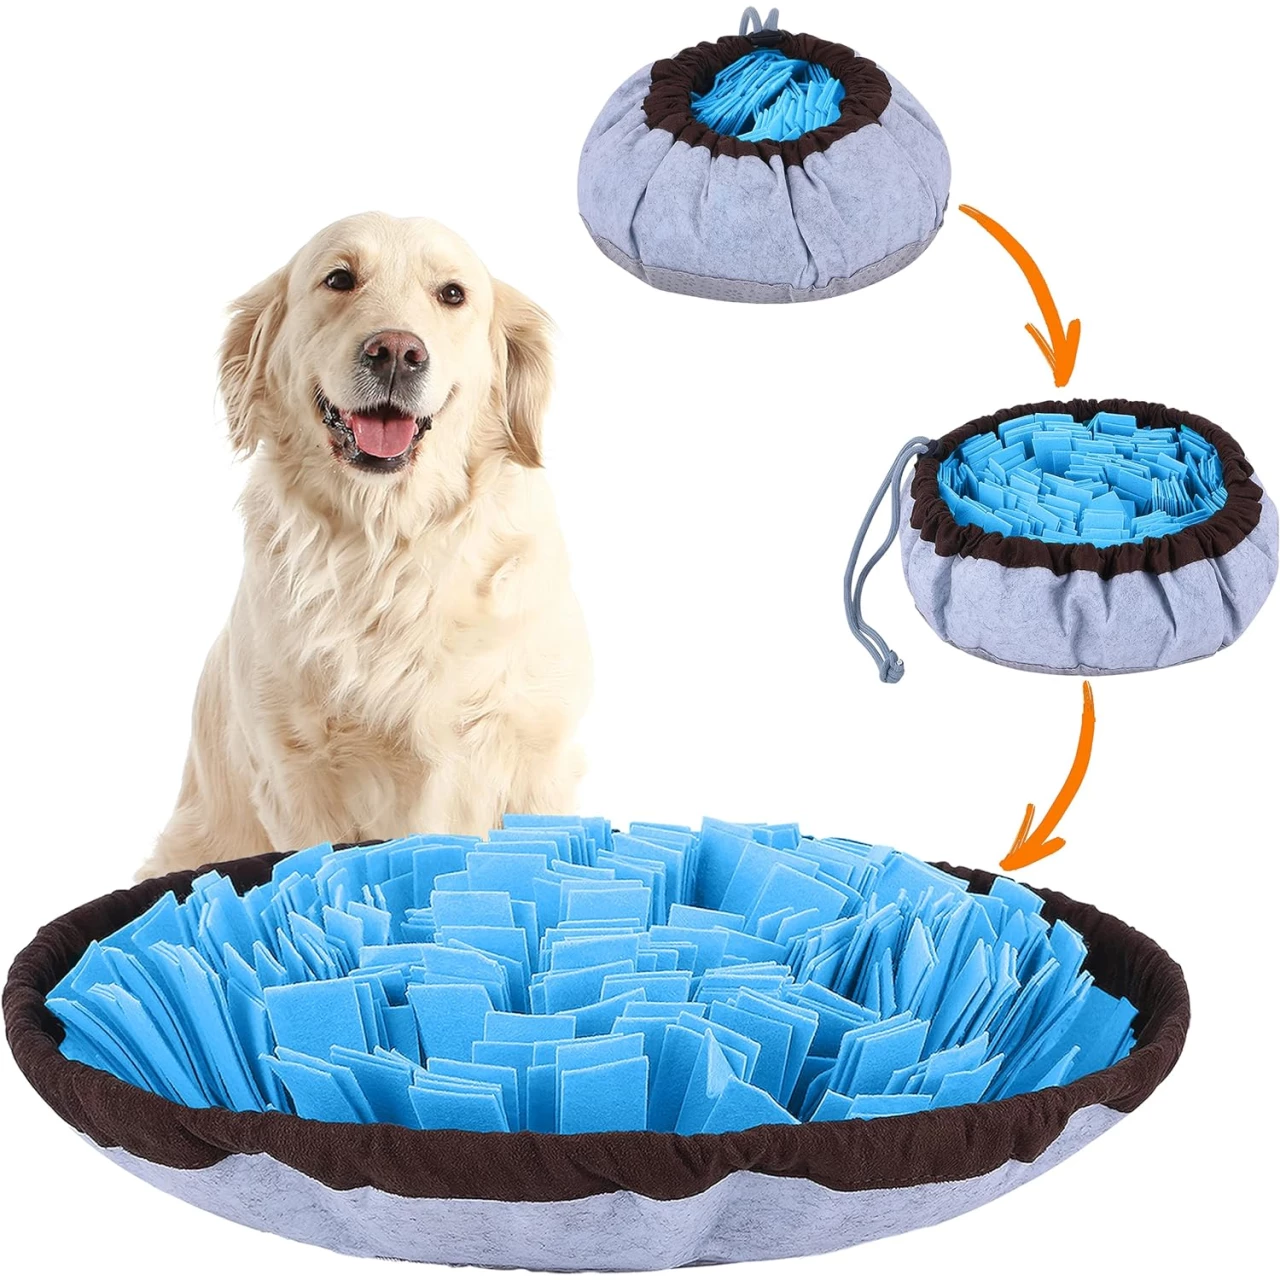 PET ARENA Adjustable Snuffle mat for Dogs, Dog Puzzle Toys, Enrichment Pet Foraging mat for Smell Training and Slow Eating, Stress Relief Interactive Dog Toy for Feeding, Dog Mental Stimulation Toys